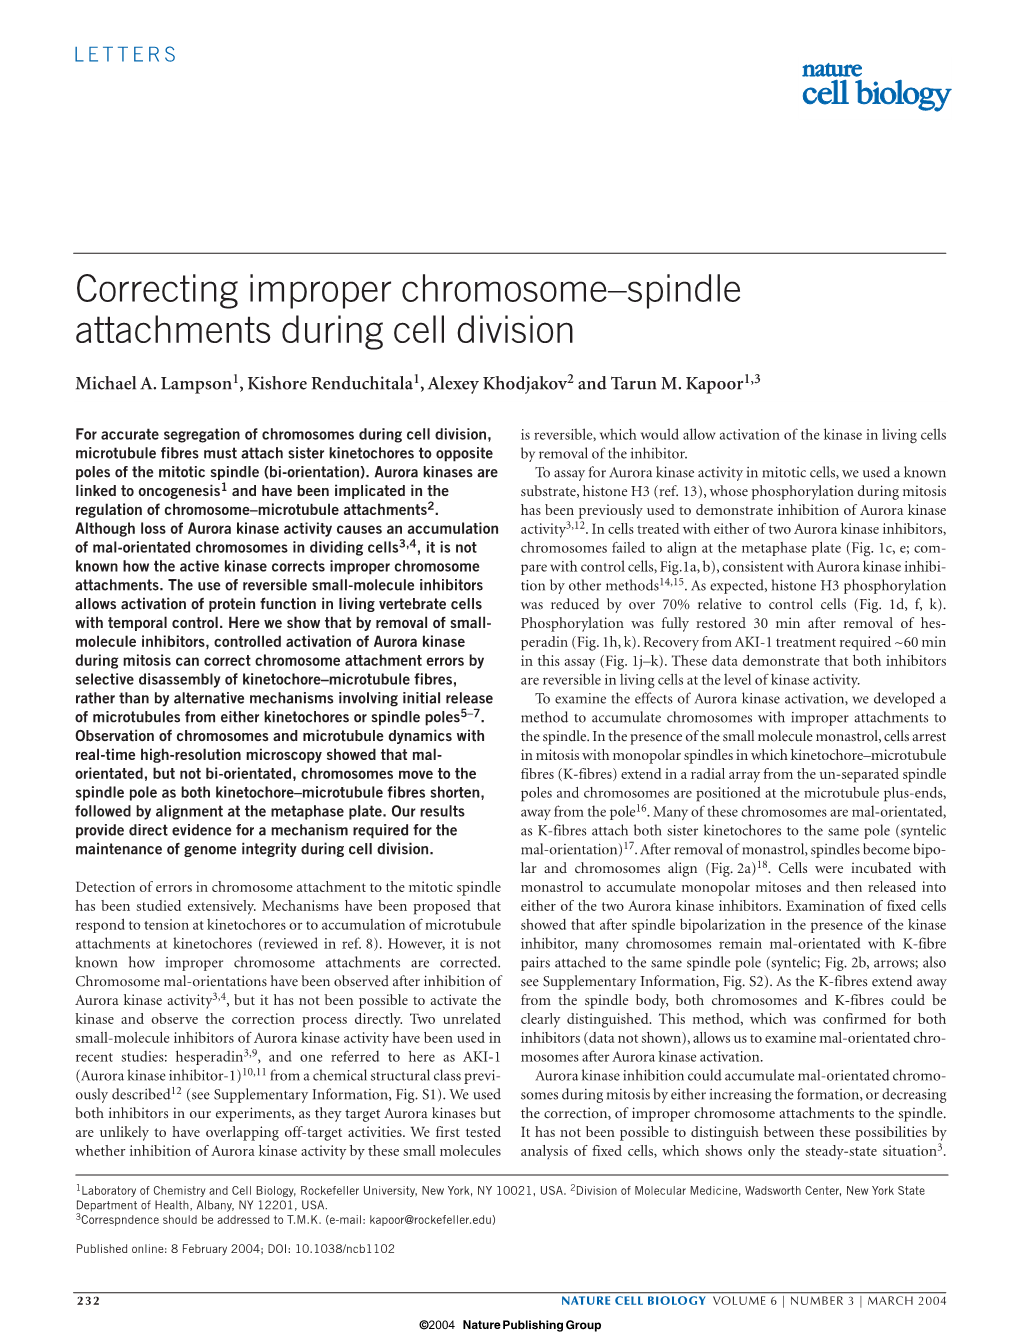 Correcting Improper Chromosome–Spindle Attachments During Cell Division